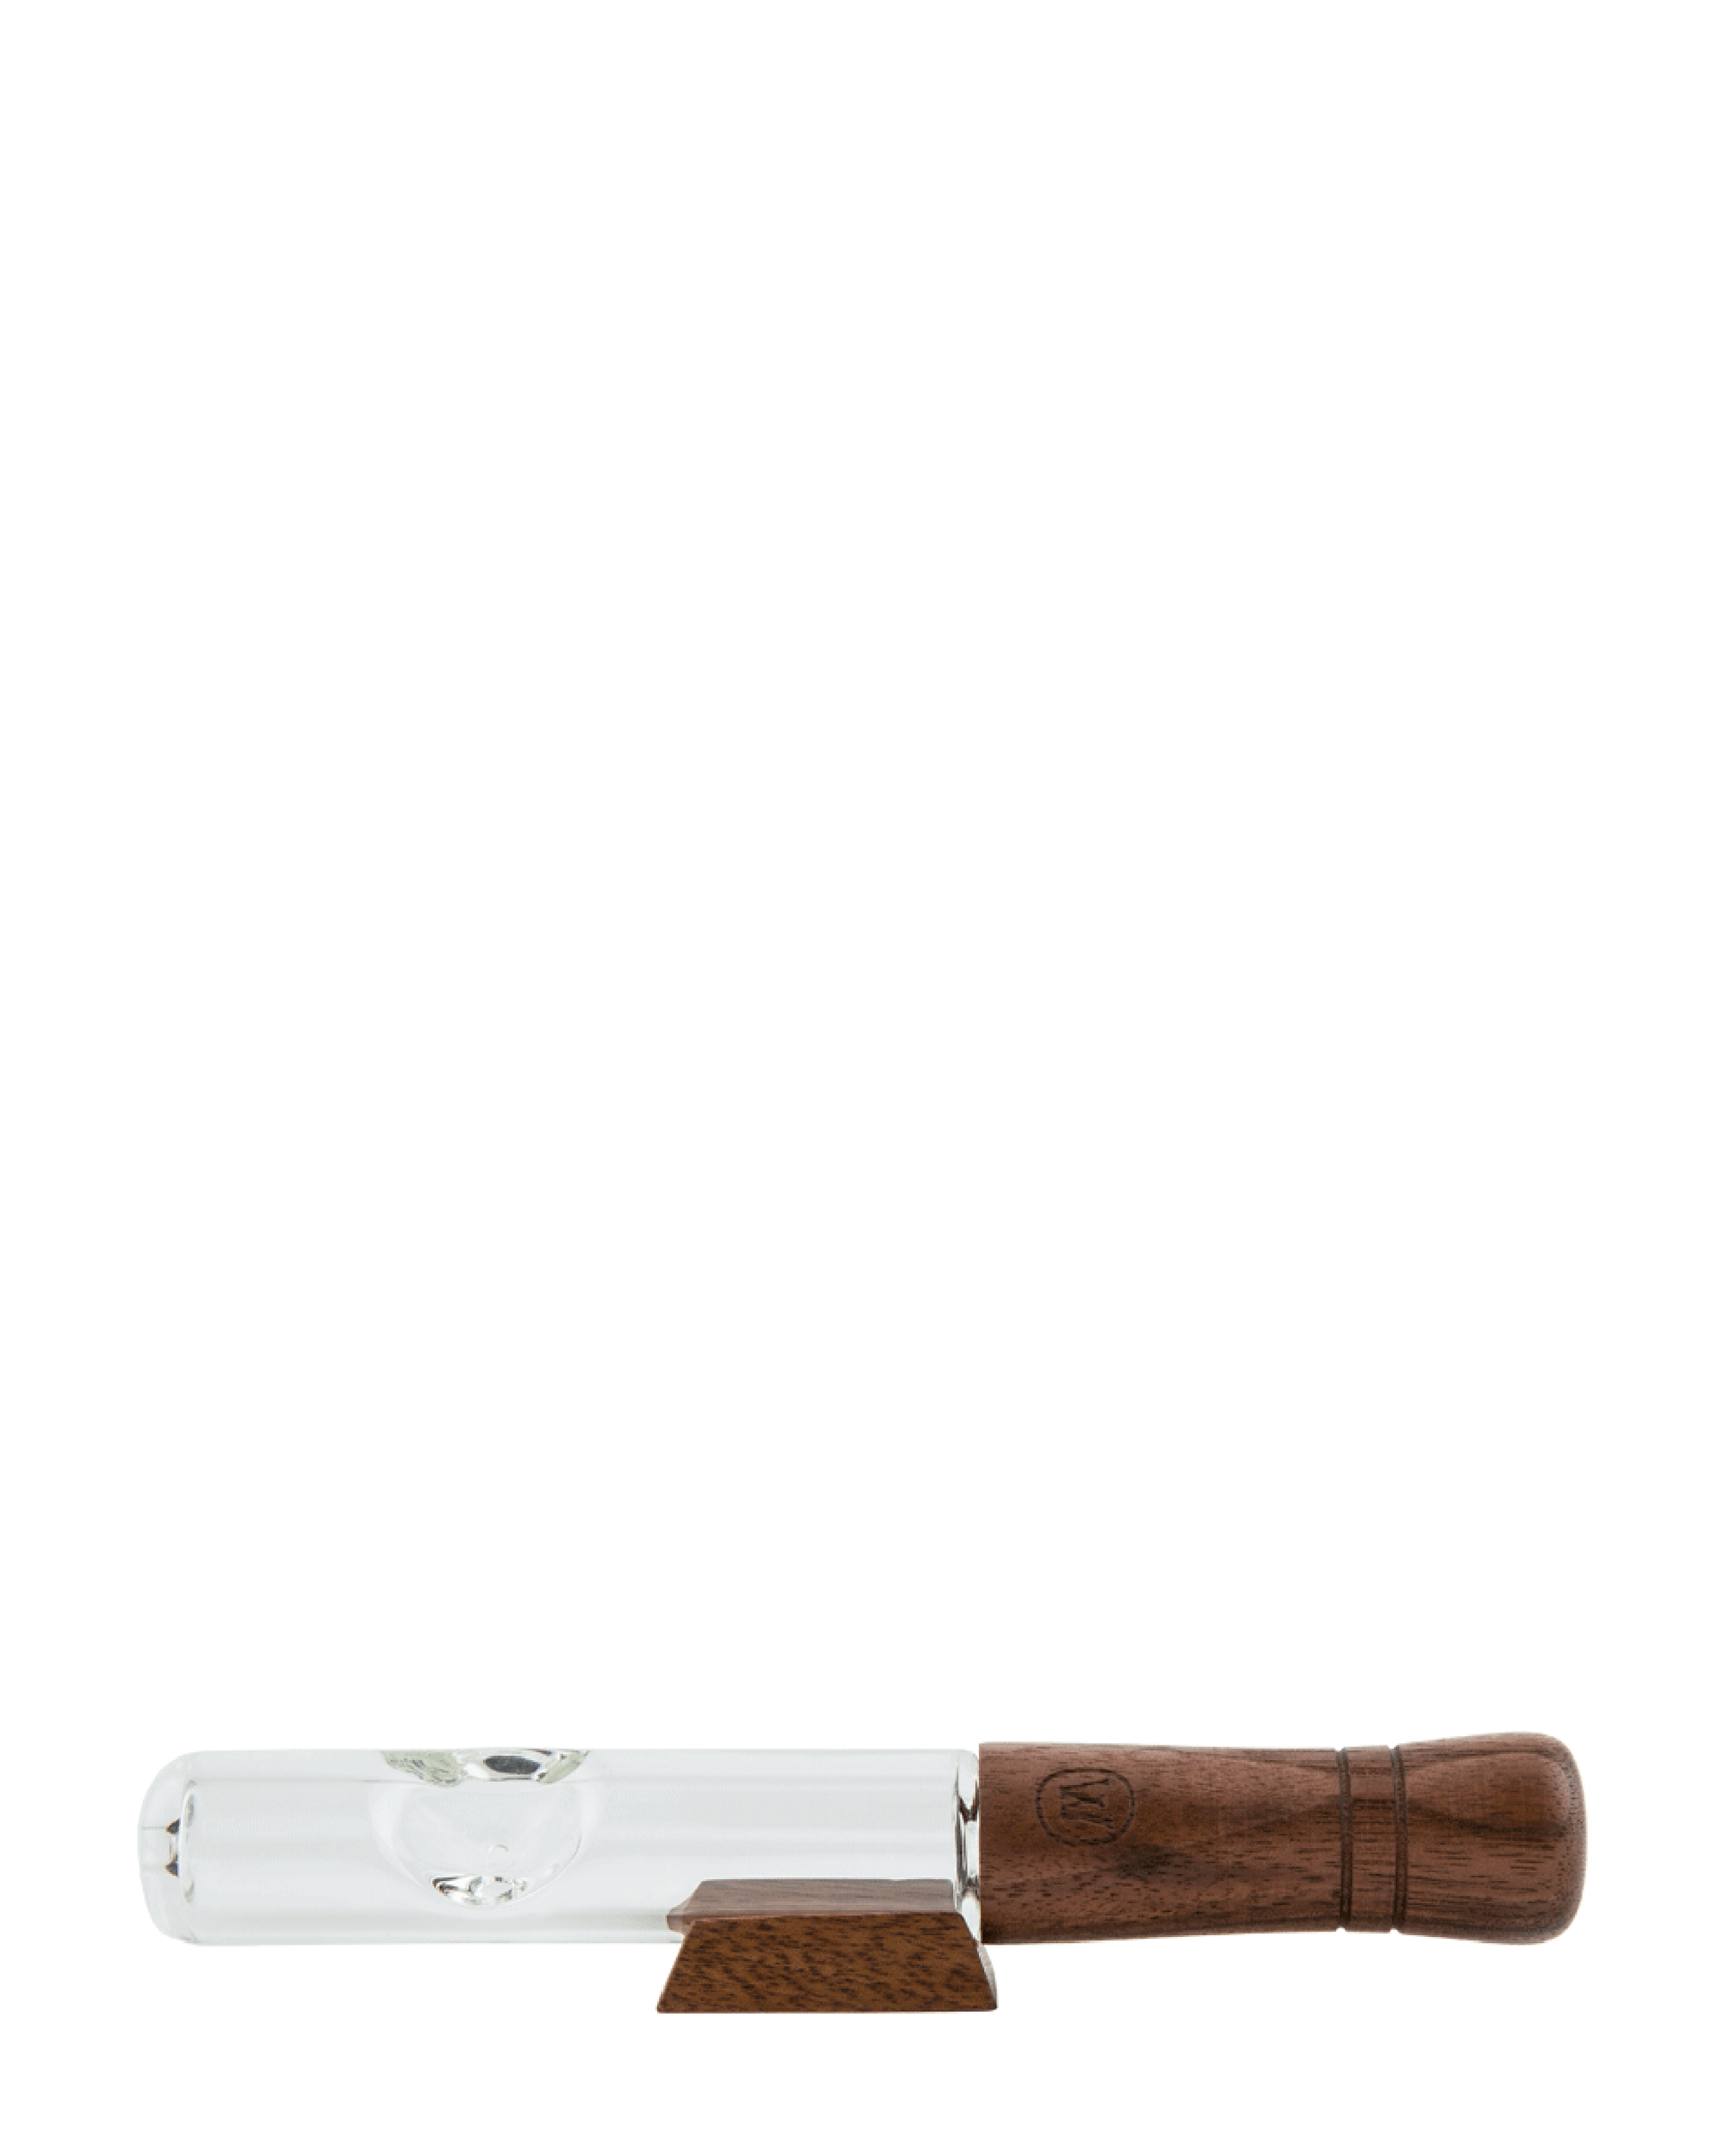 Marley Natural | Steamroller Heat Resistant Hand Pipe | 6.5in Long - Glass - Black Walnut - 2